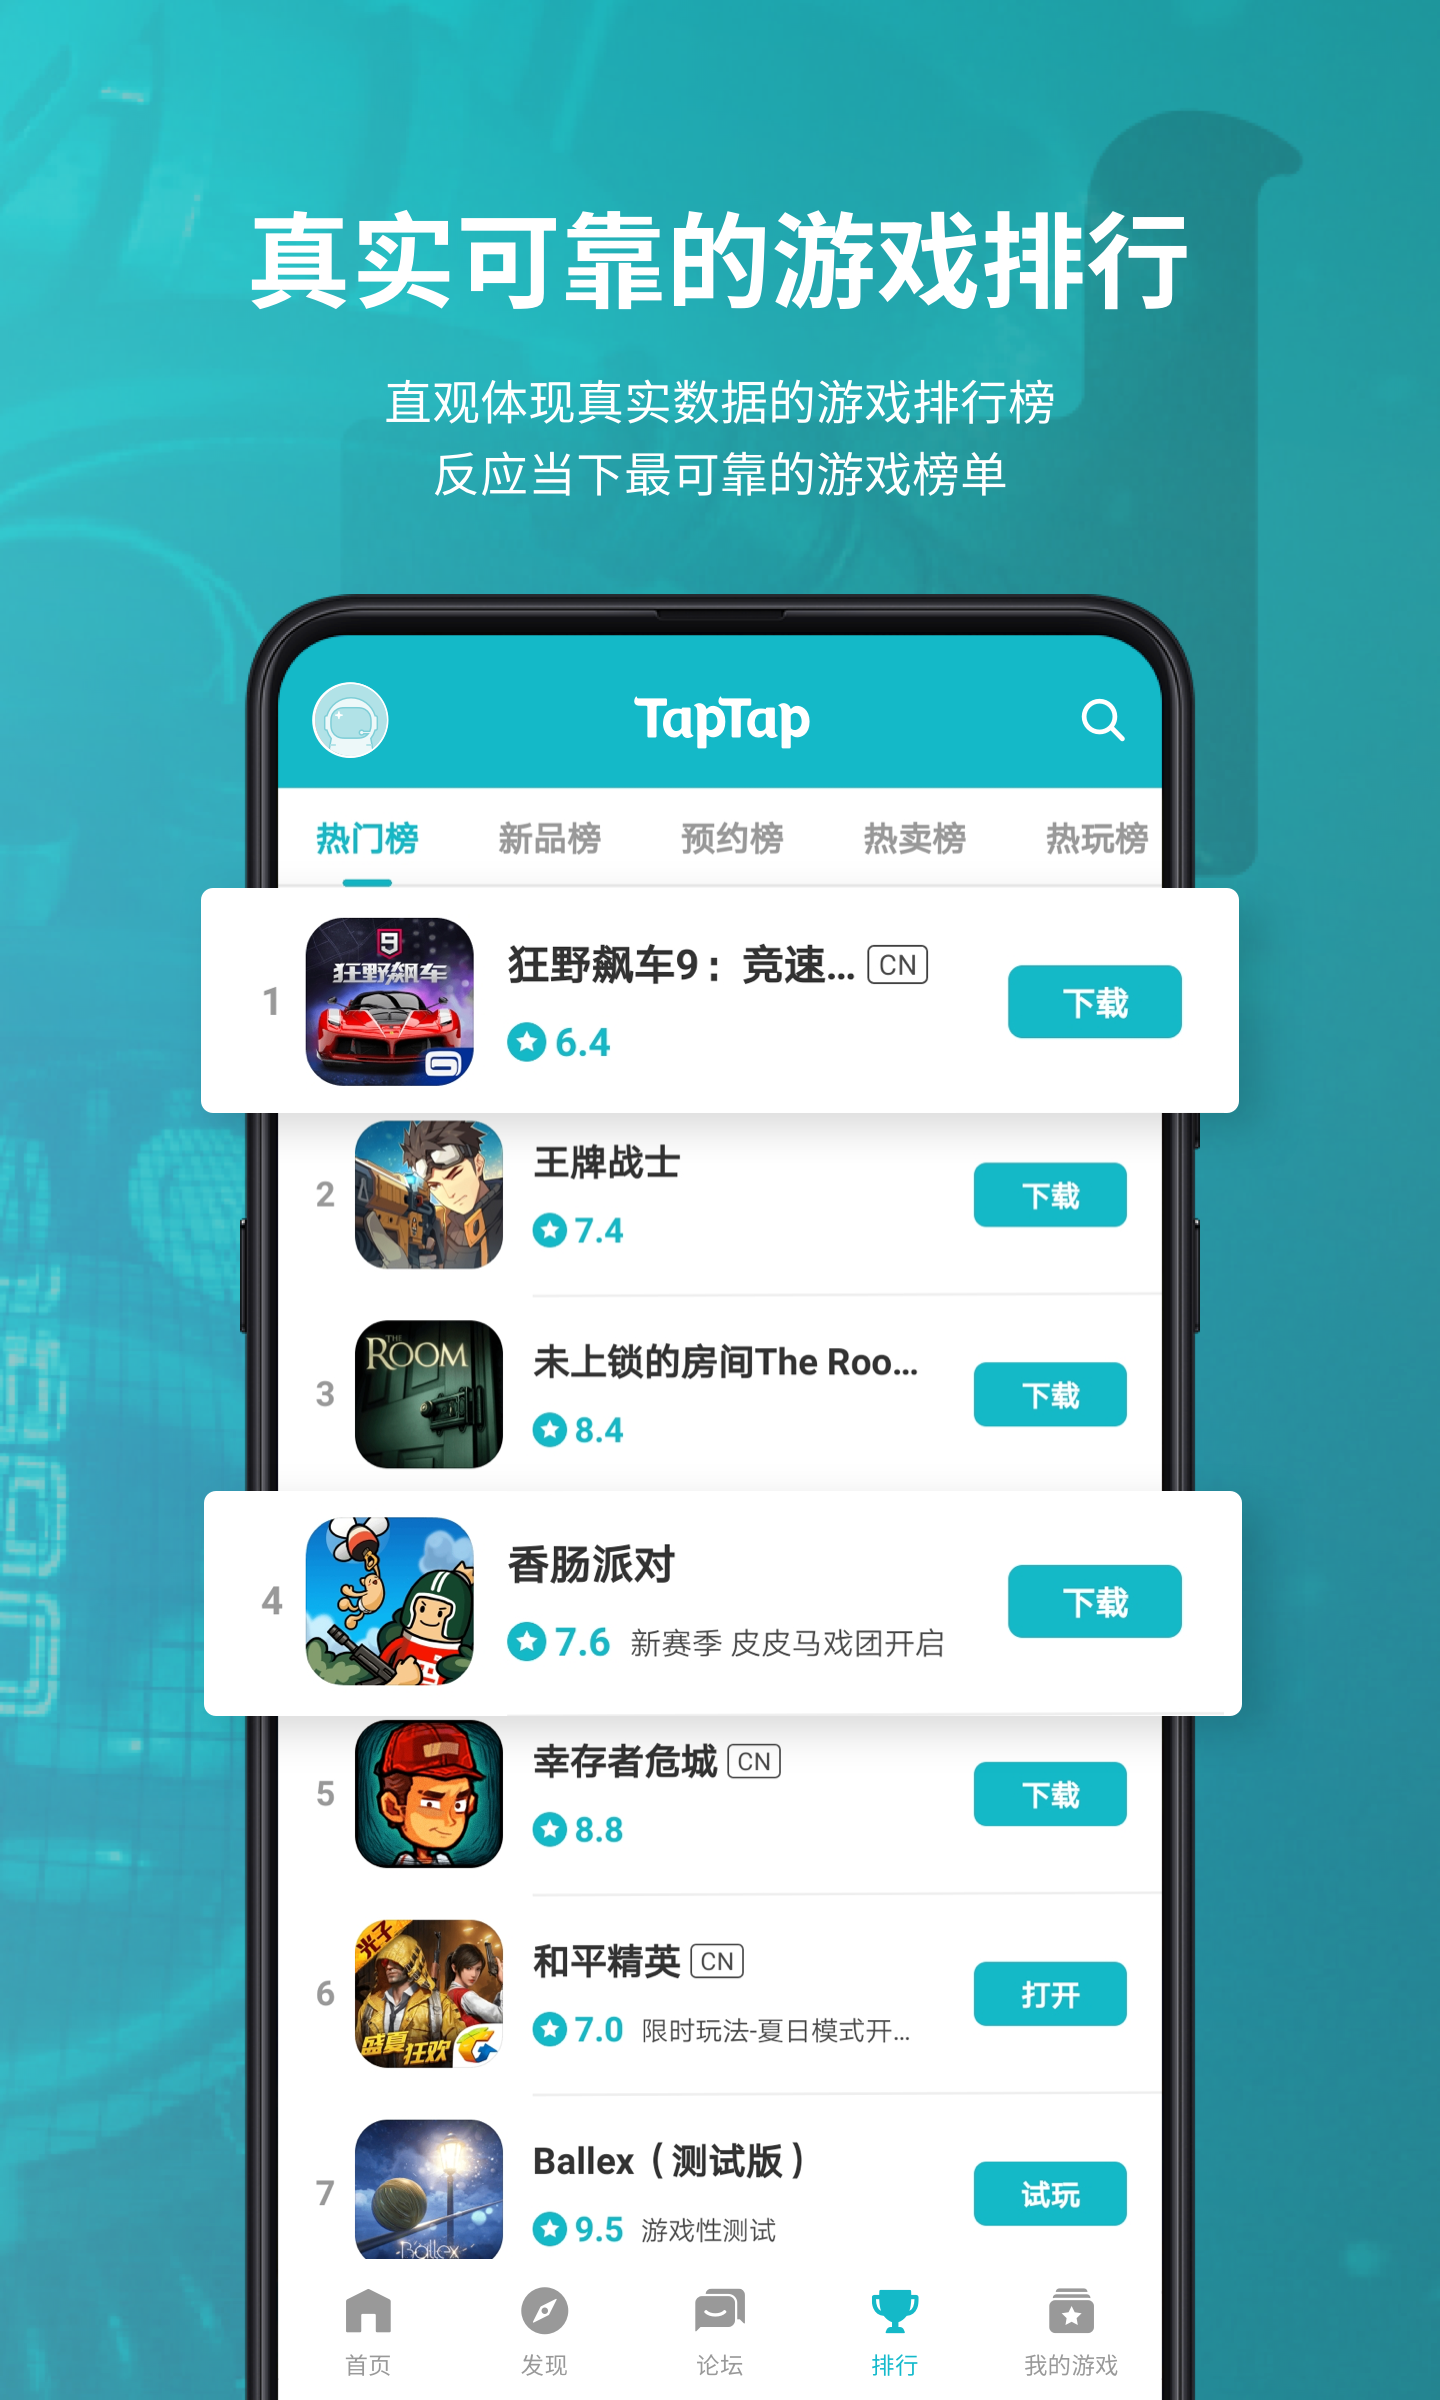 how to download games from taptap